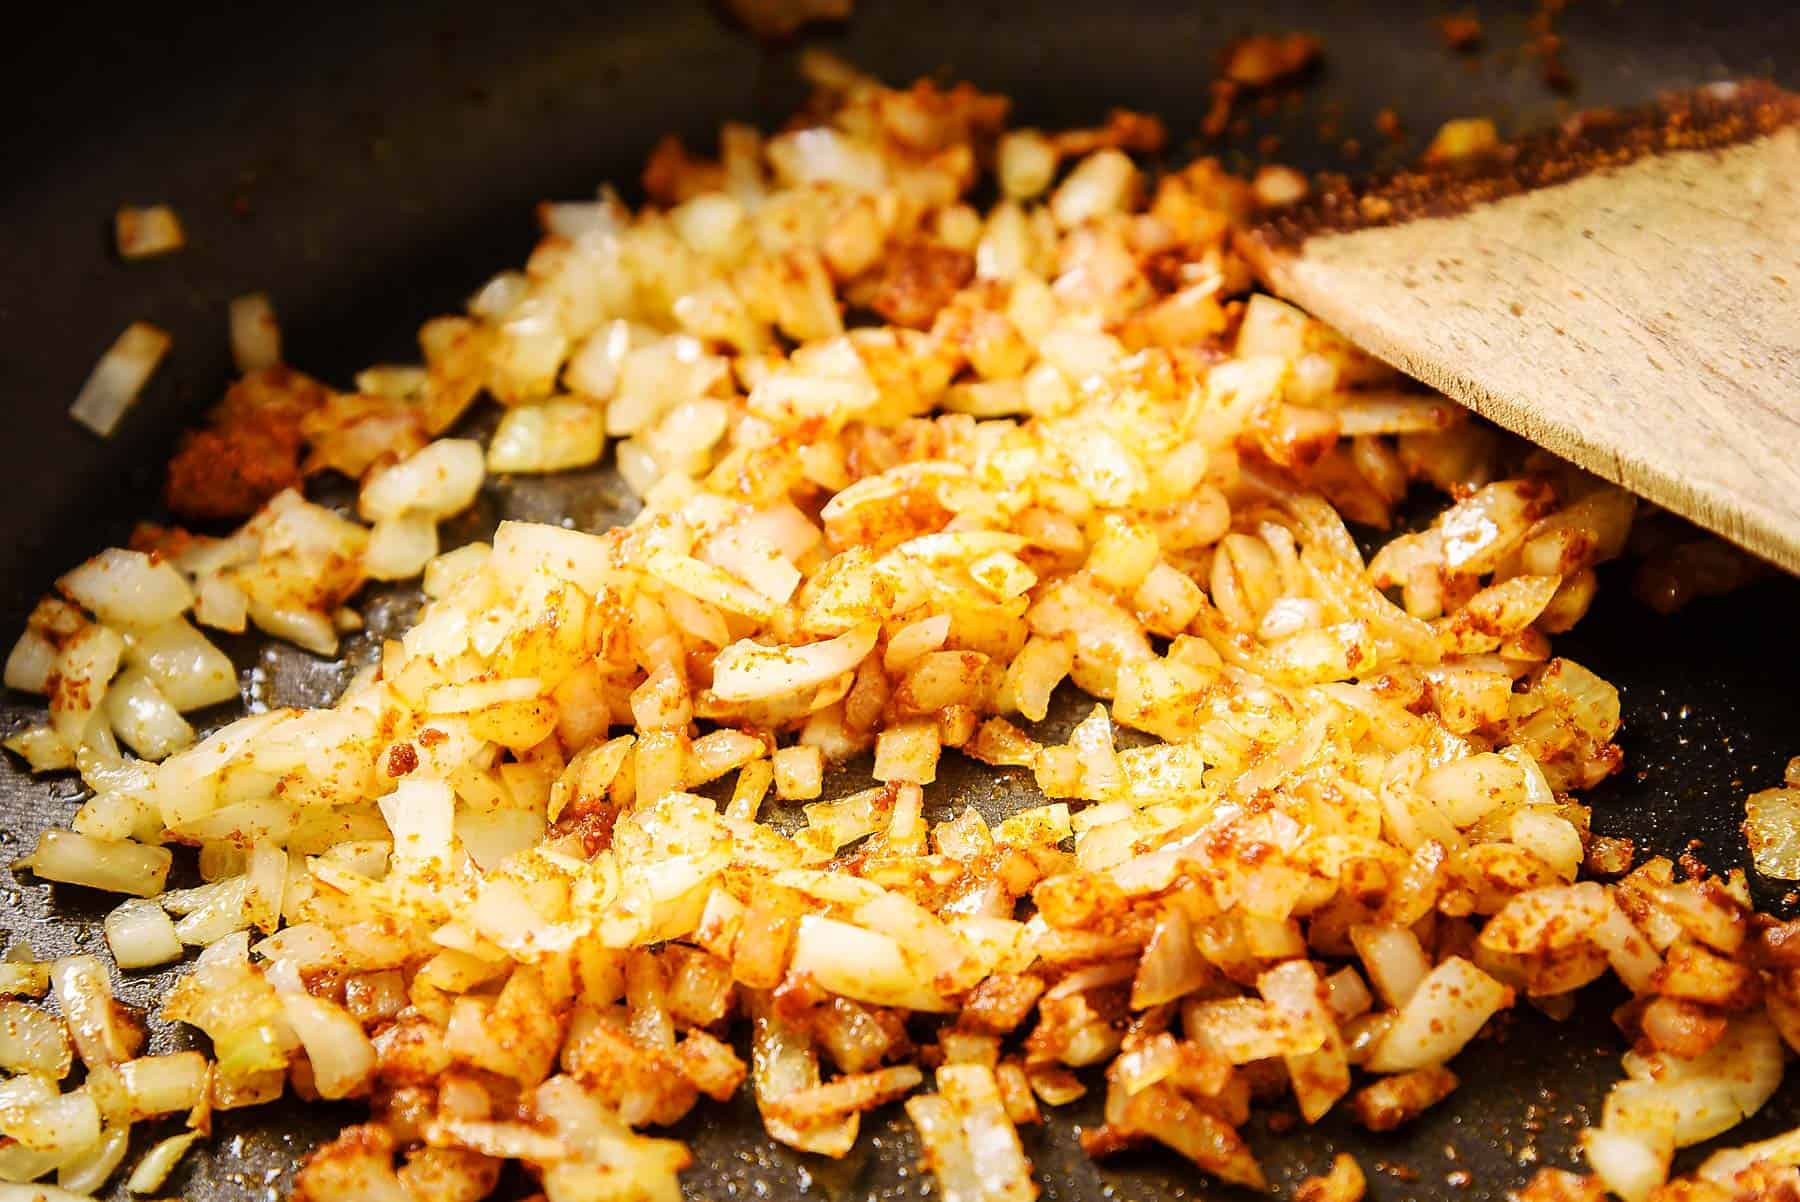 Adding the curry powder to the onions in the pan